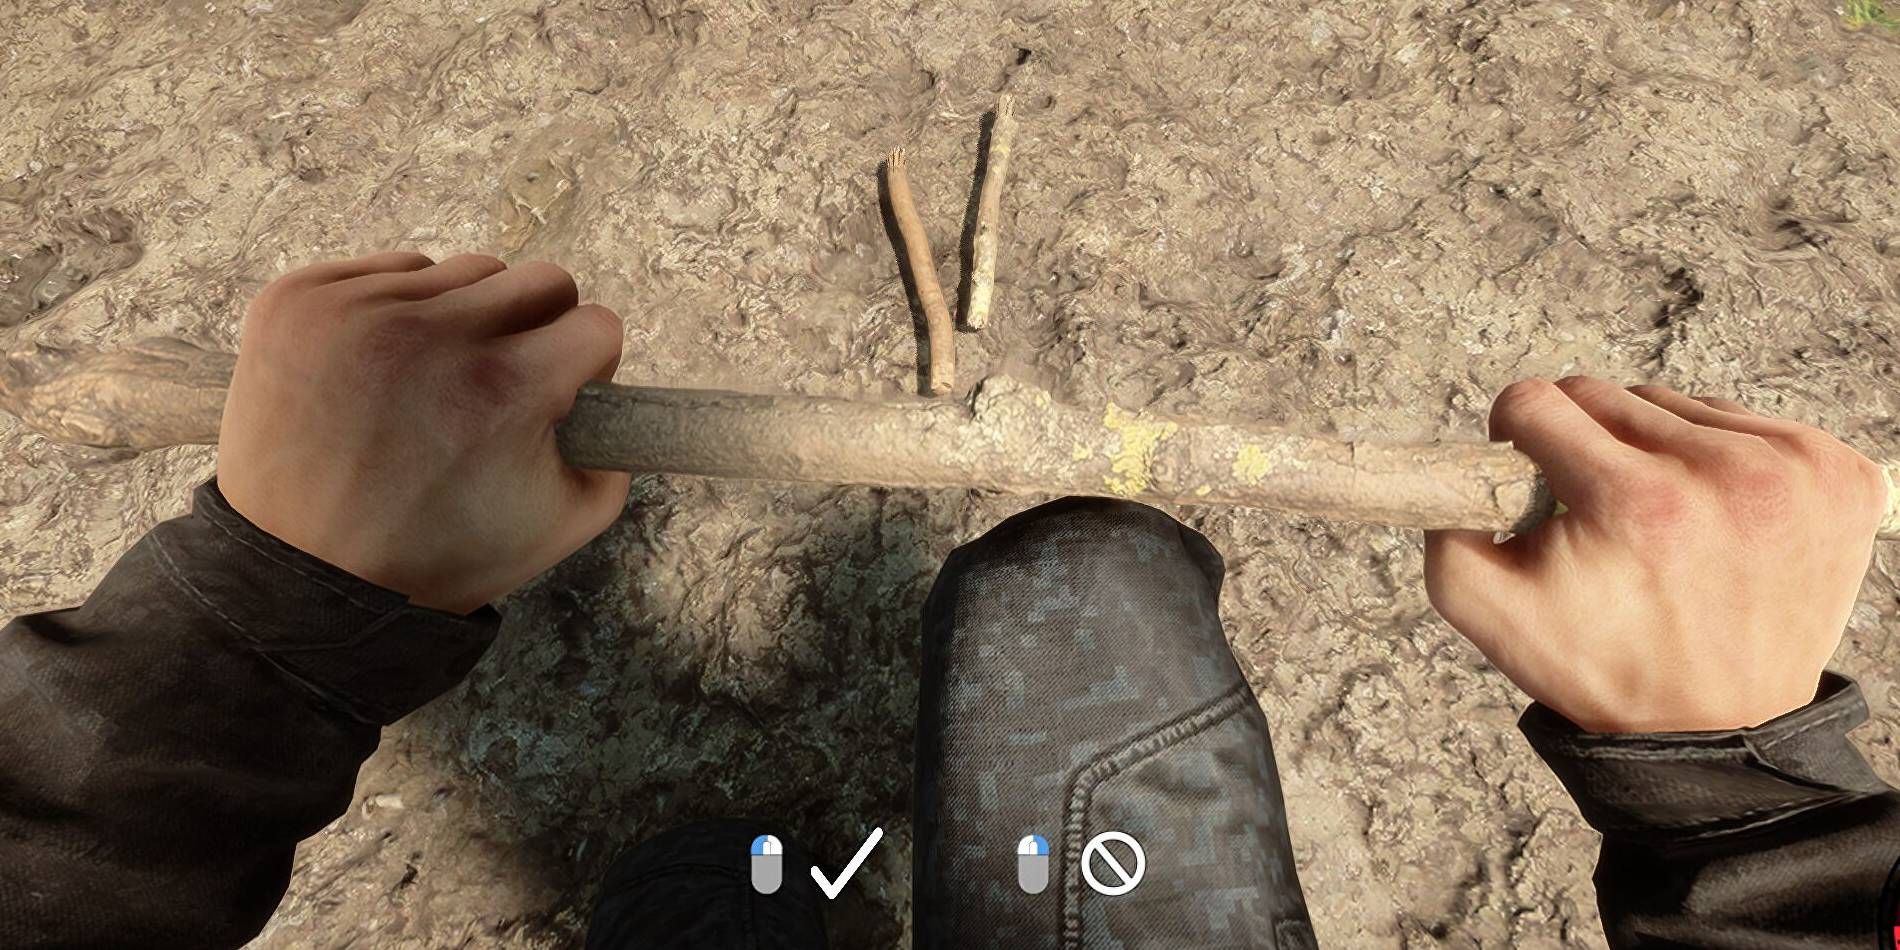 Sons of the Forest Different Stick Prompts for Player to Either Break Them for Fire or Stick One in Ground